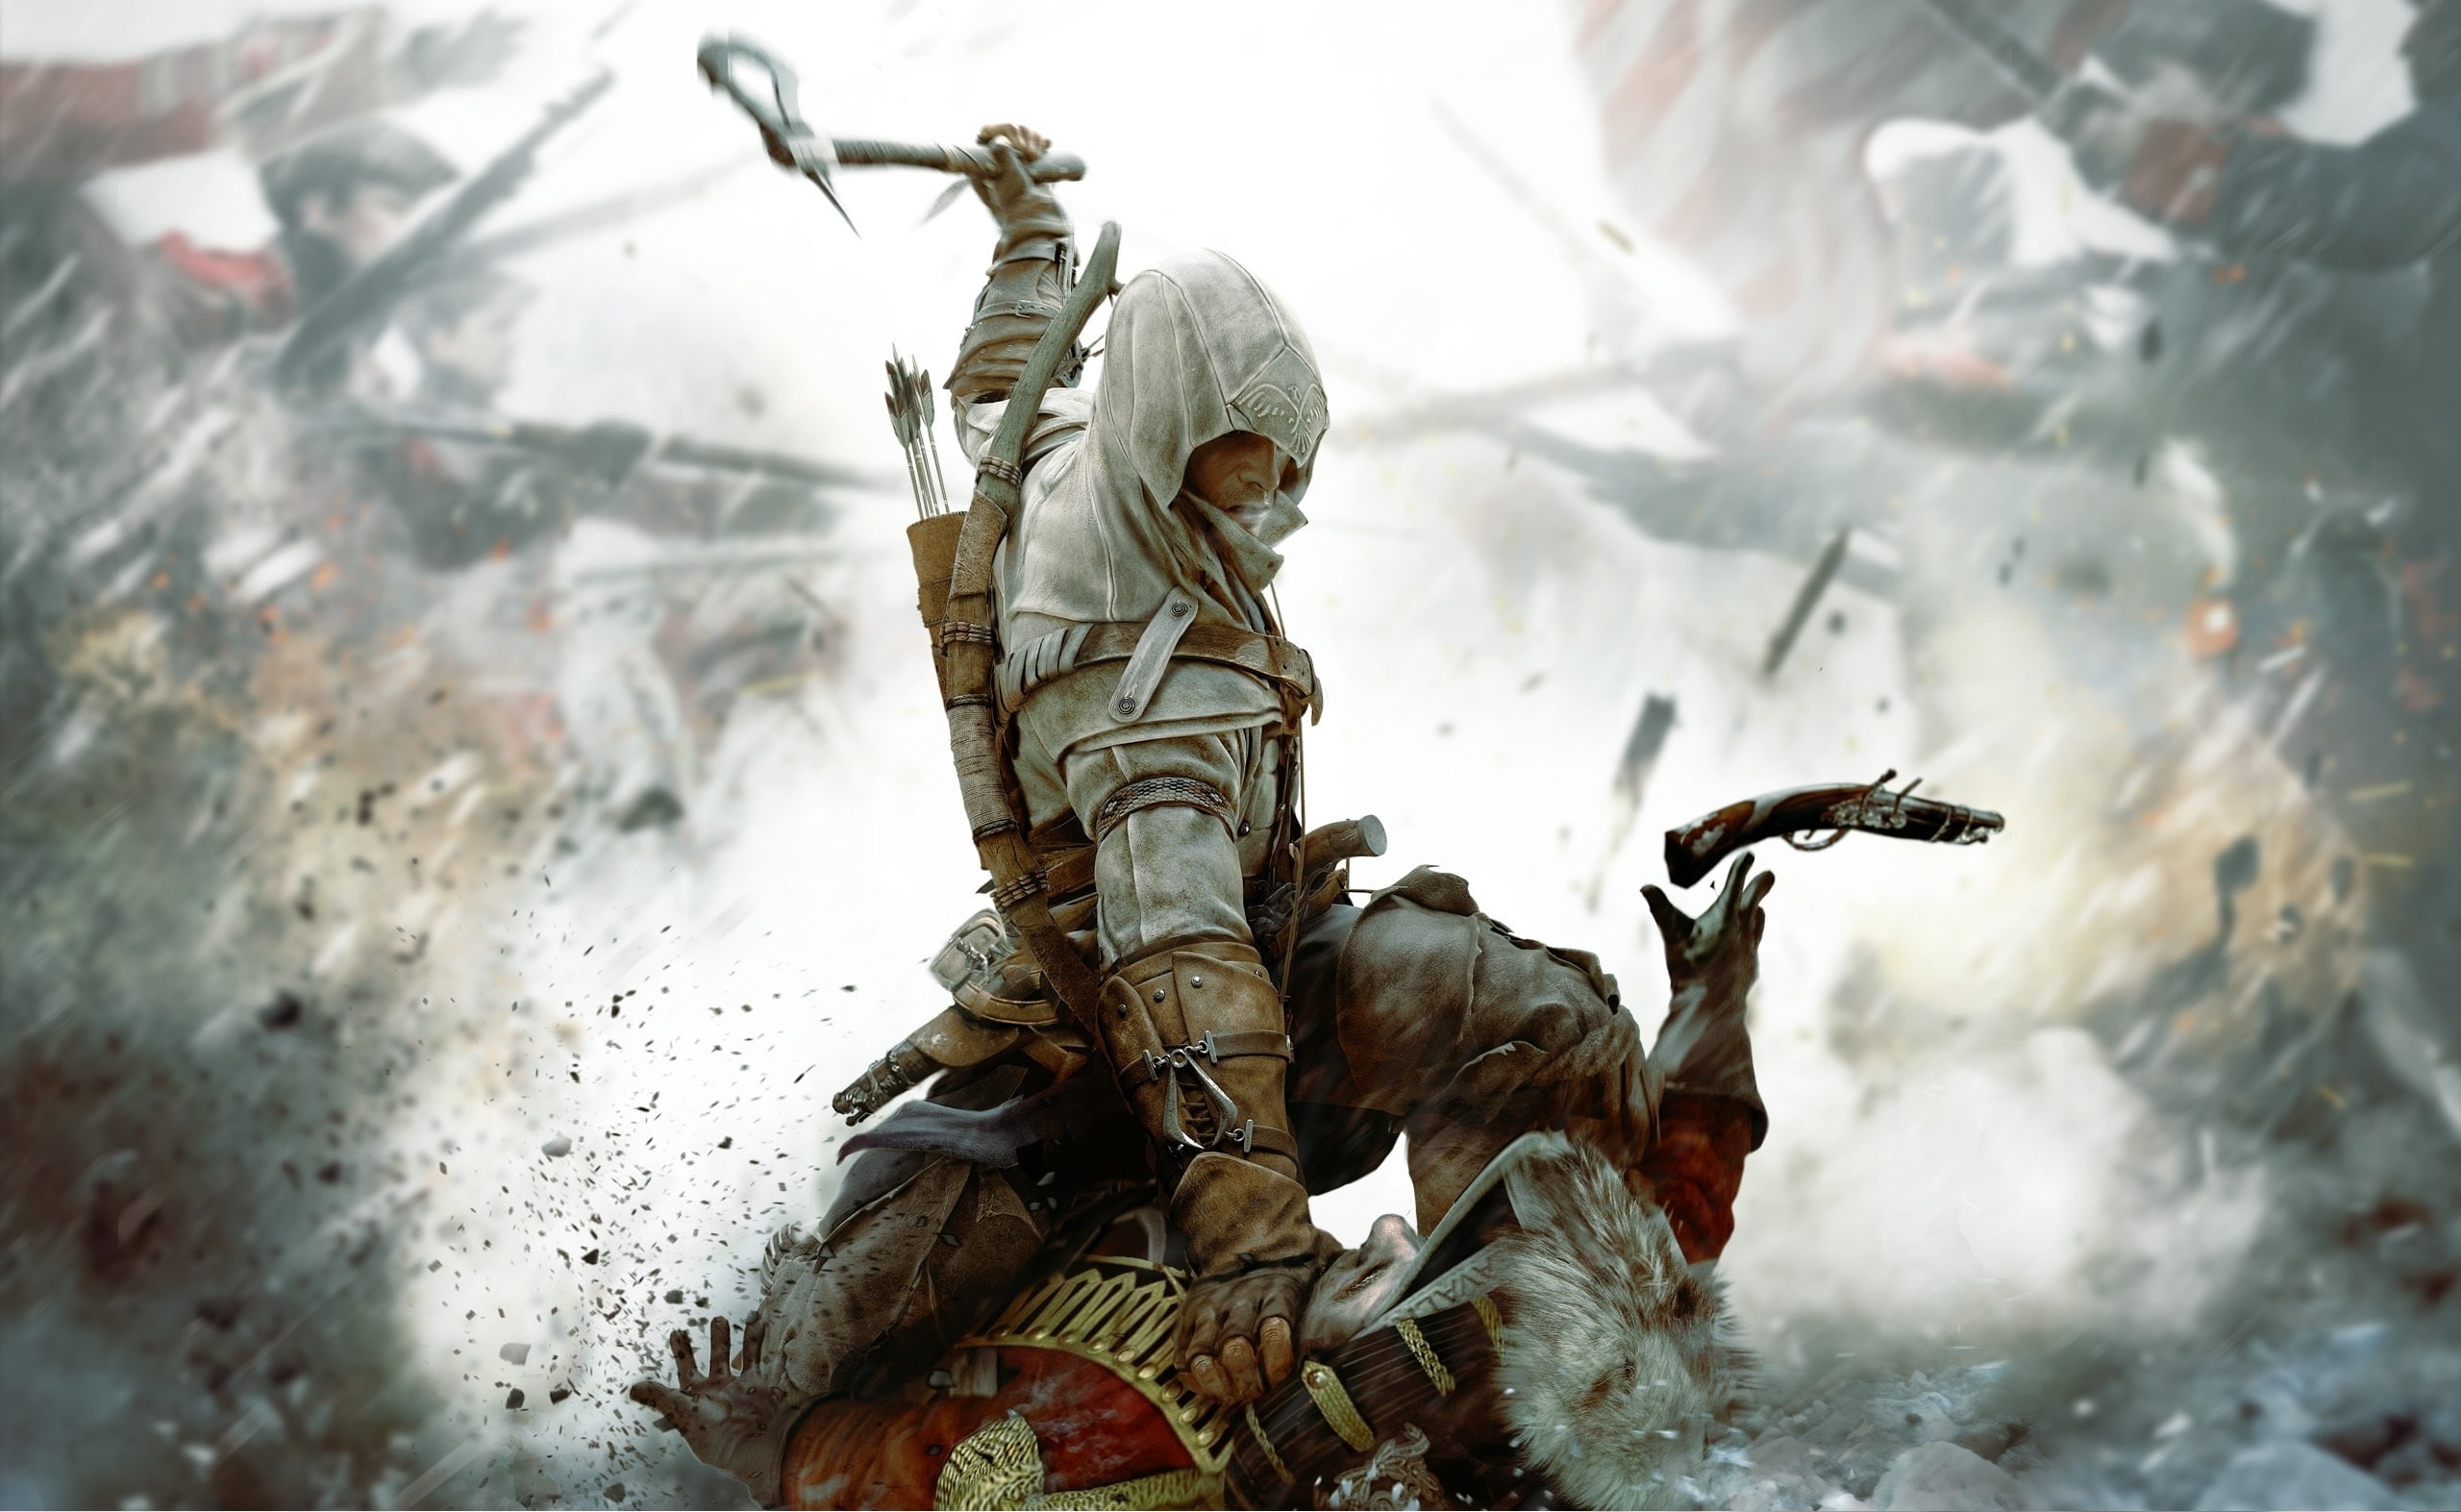 Assassins Creed III, male anime character wallpaper, Games, Assassin's Creed